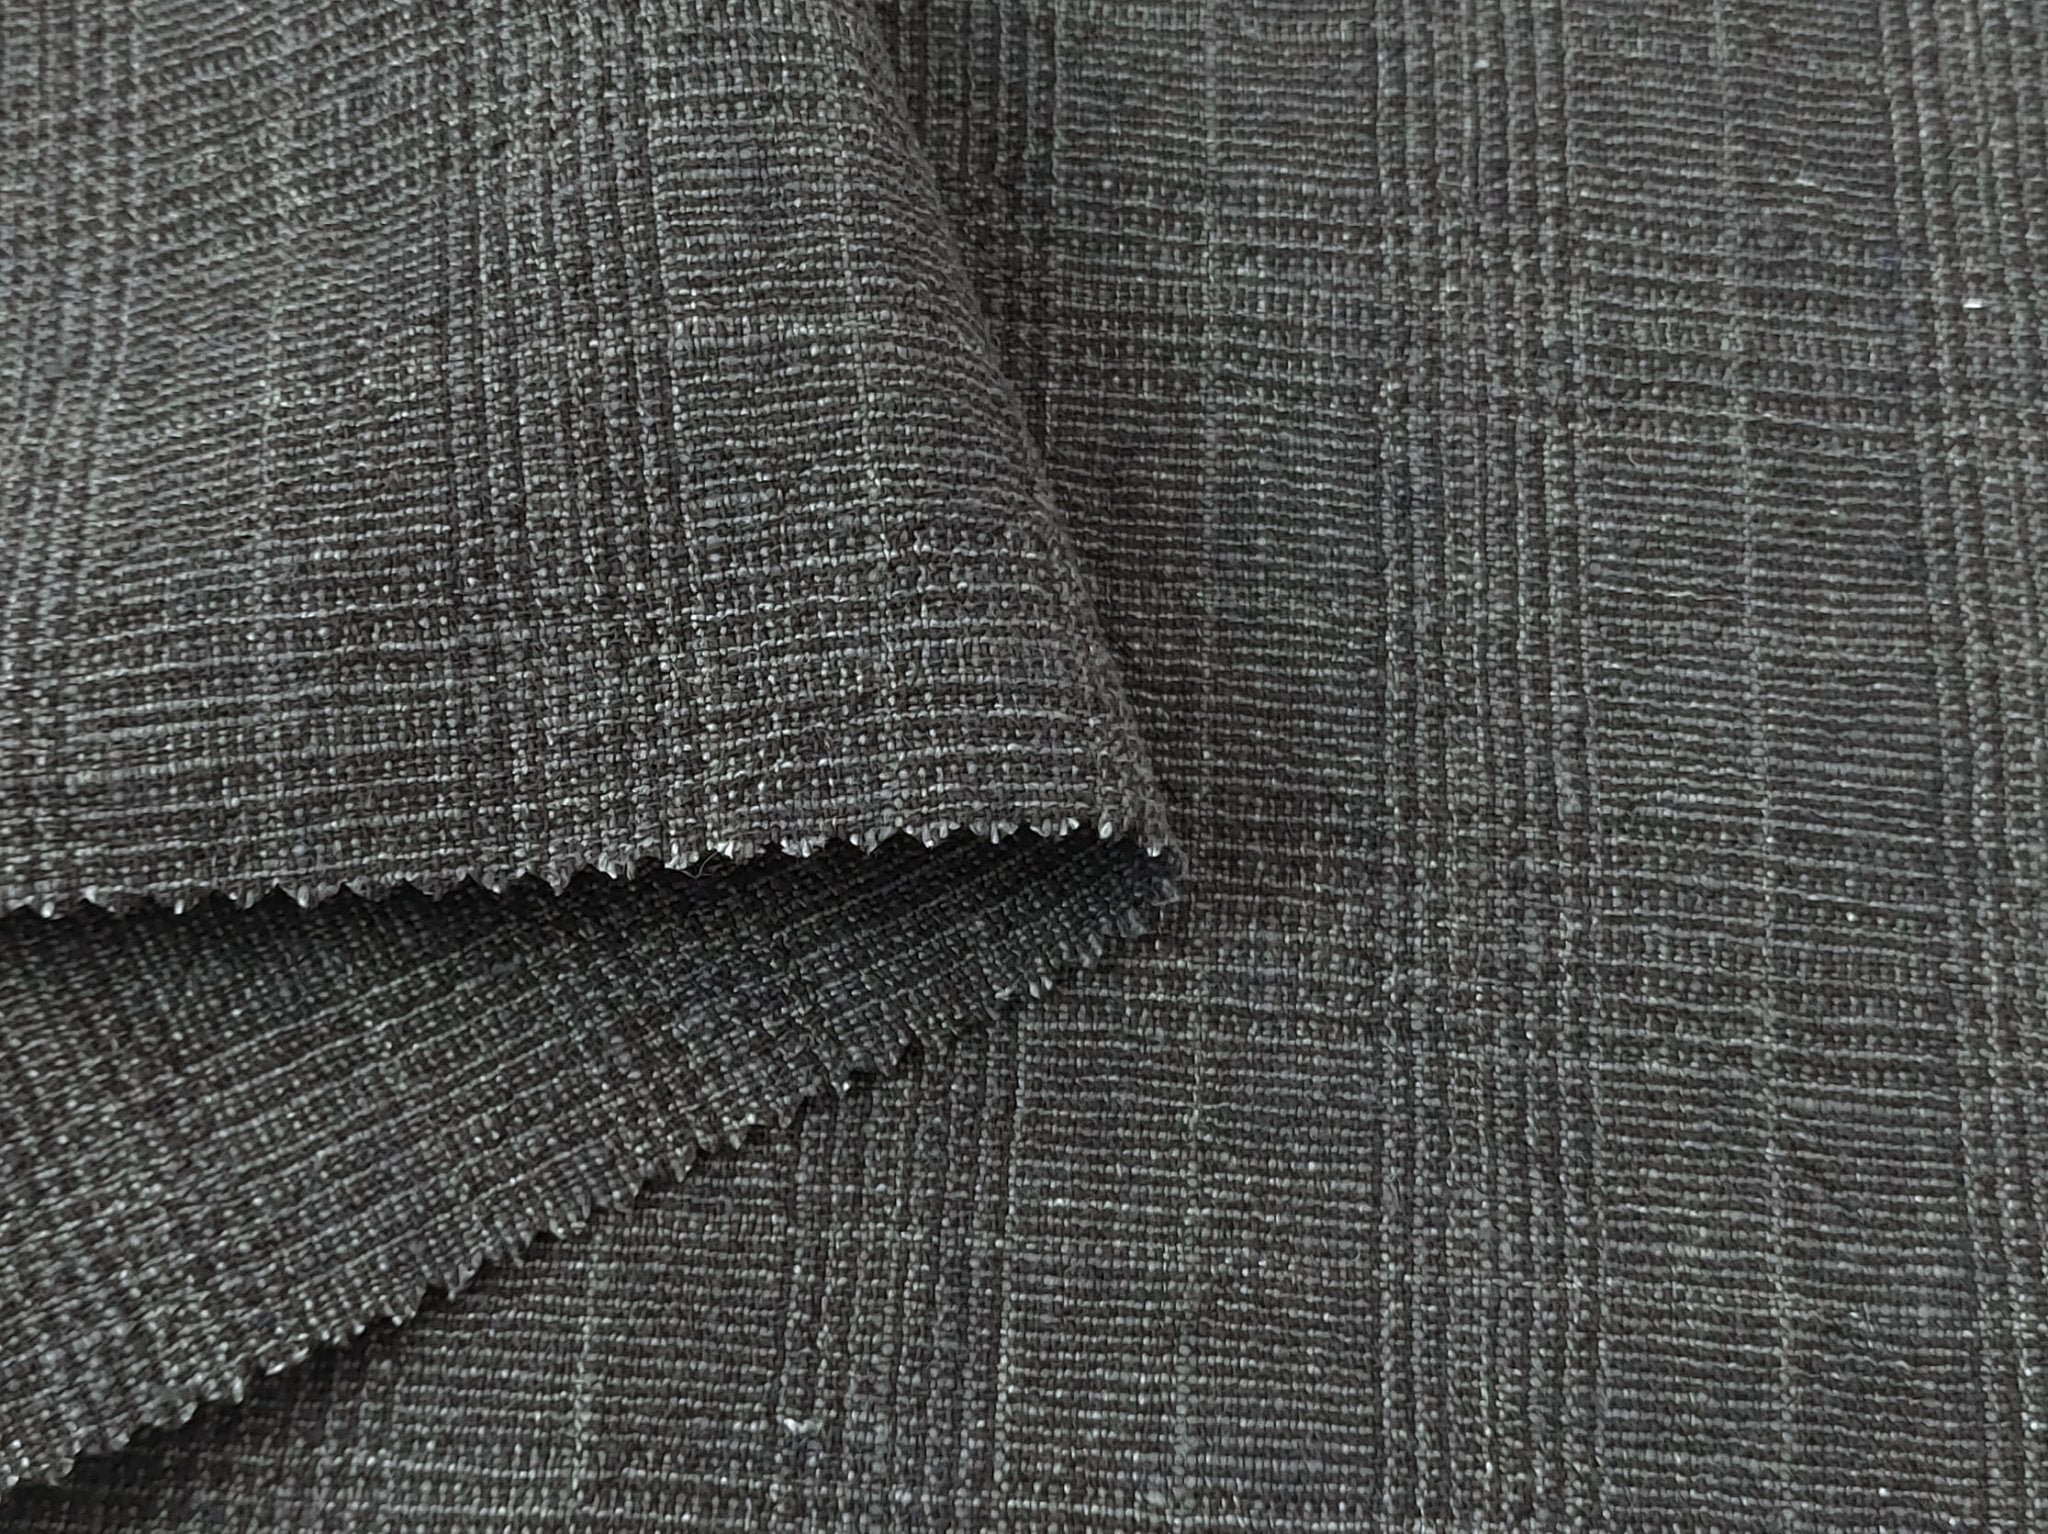 Linen Cotton Glen Plaid Fabric: Heavyweight Elegance for Crafting and Home Décor 7582 7583 - The Linen Lab - Grey